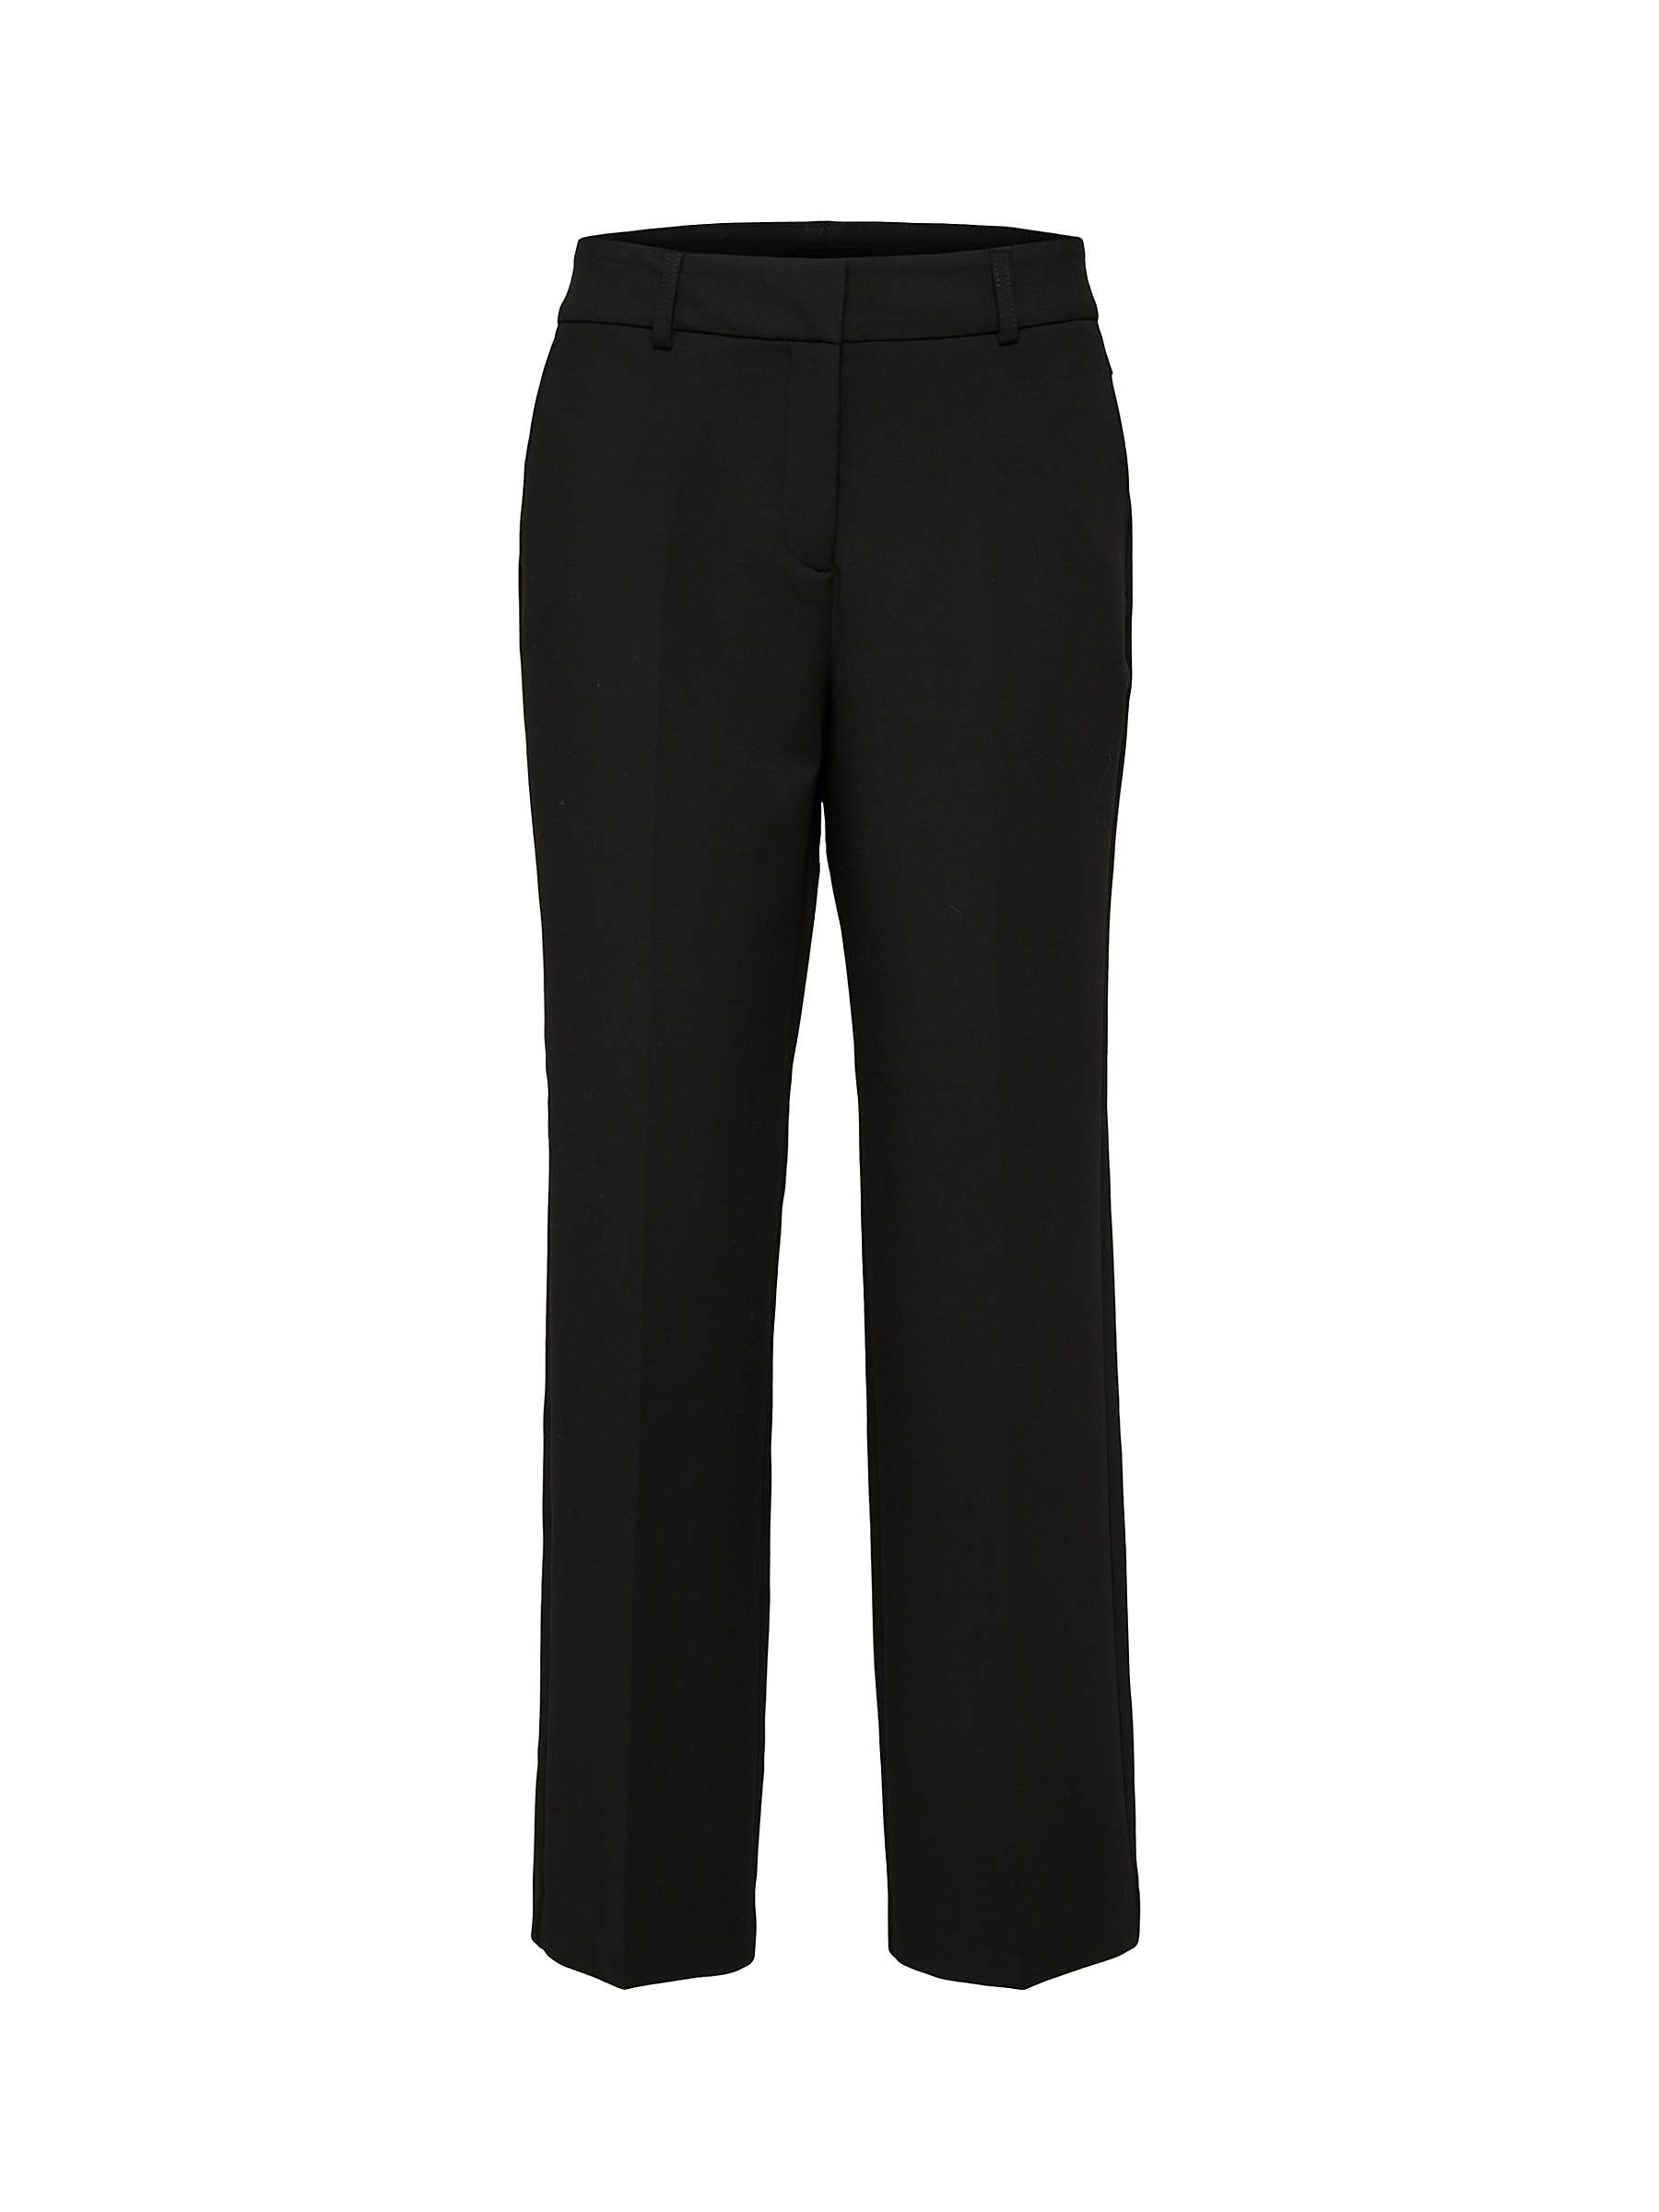 Buy SELECTED FEMME Straight Cut Tailored Trousers, Black Online at johnlewis.com